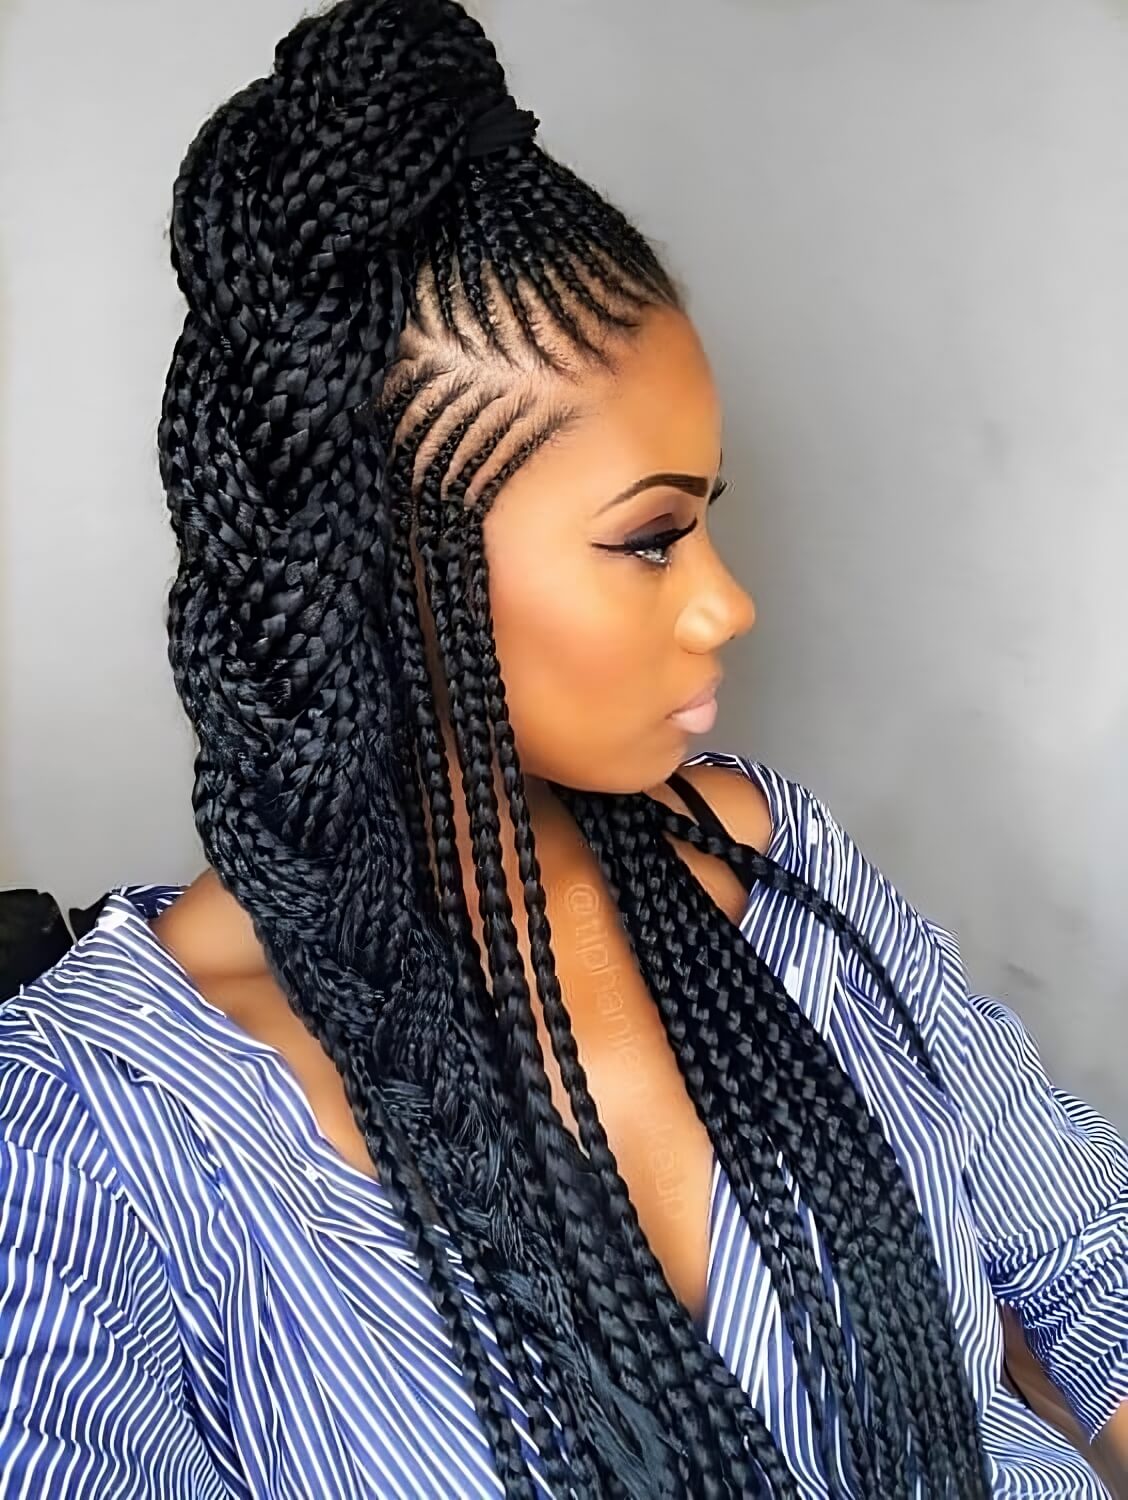 50 Trendy Braided Hairstyles To Instantly Glam Up Your Look - 319